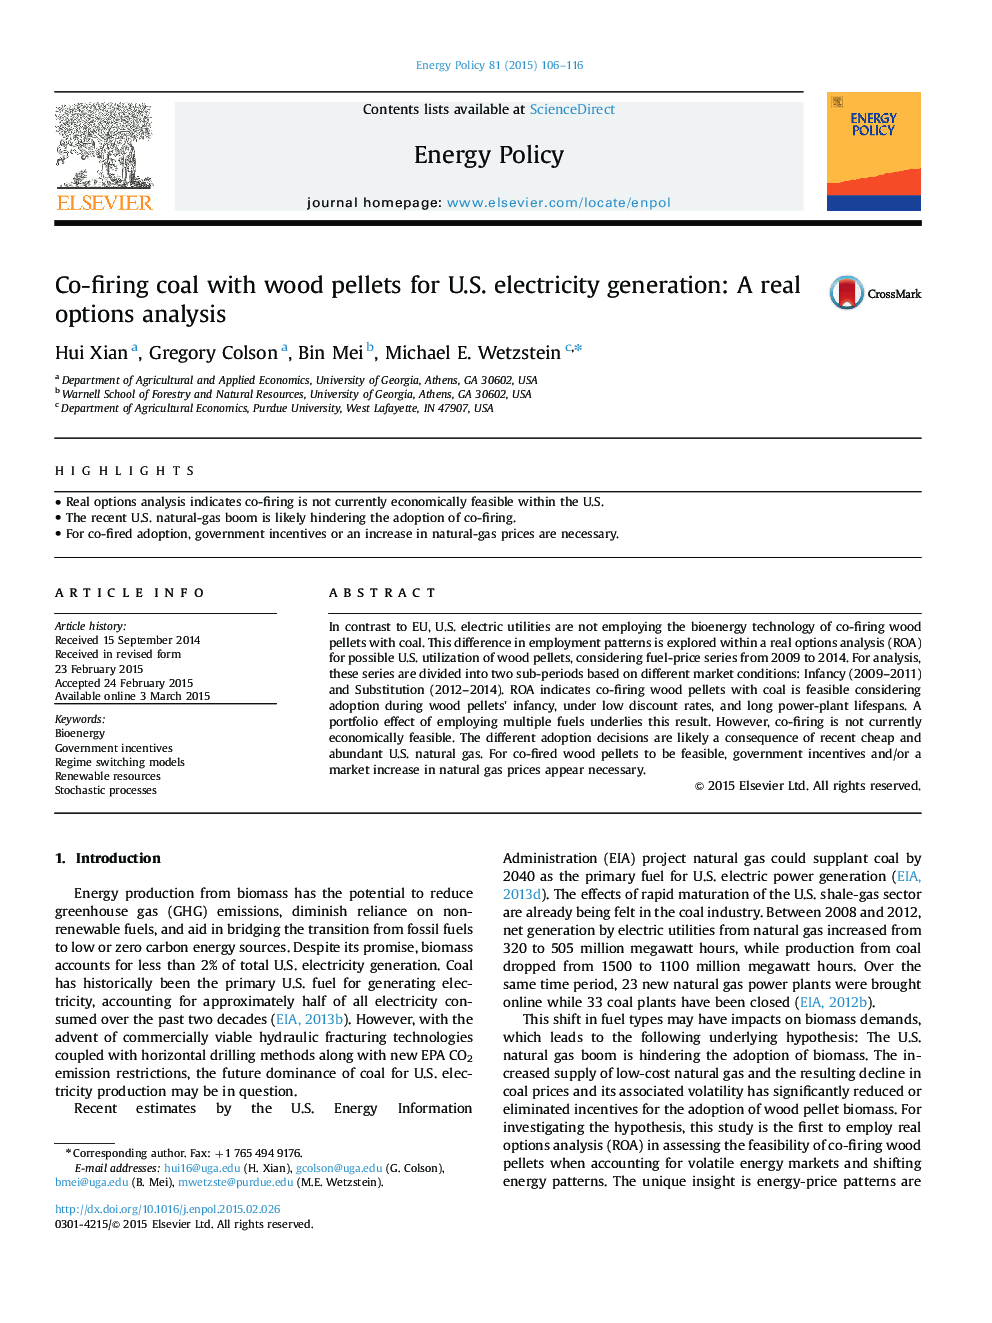 Co-firing coal with wood pellets for U.S. electricity generation: A real options analysis